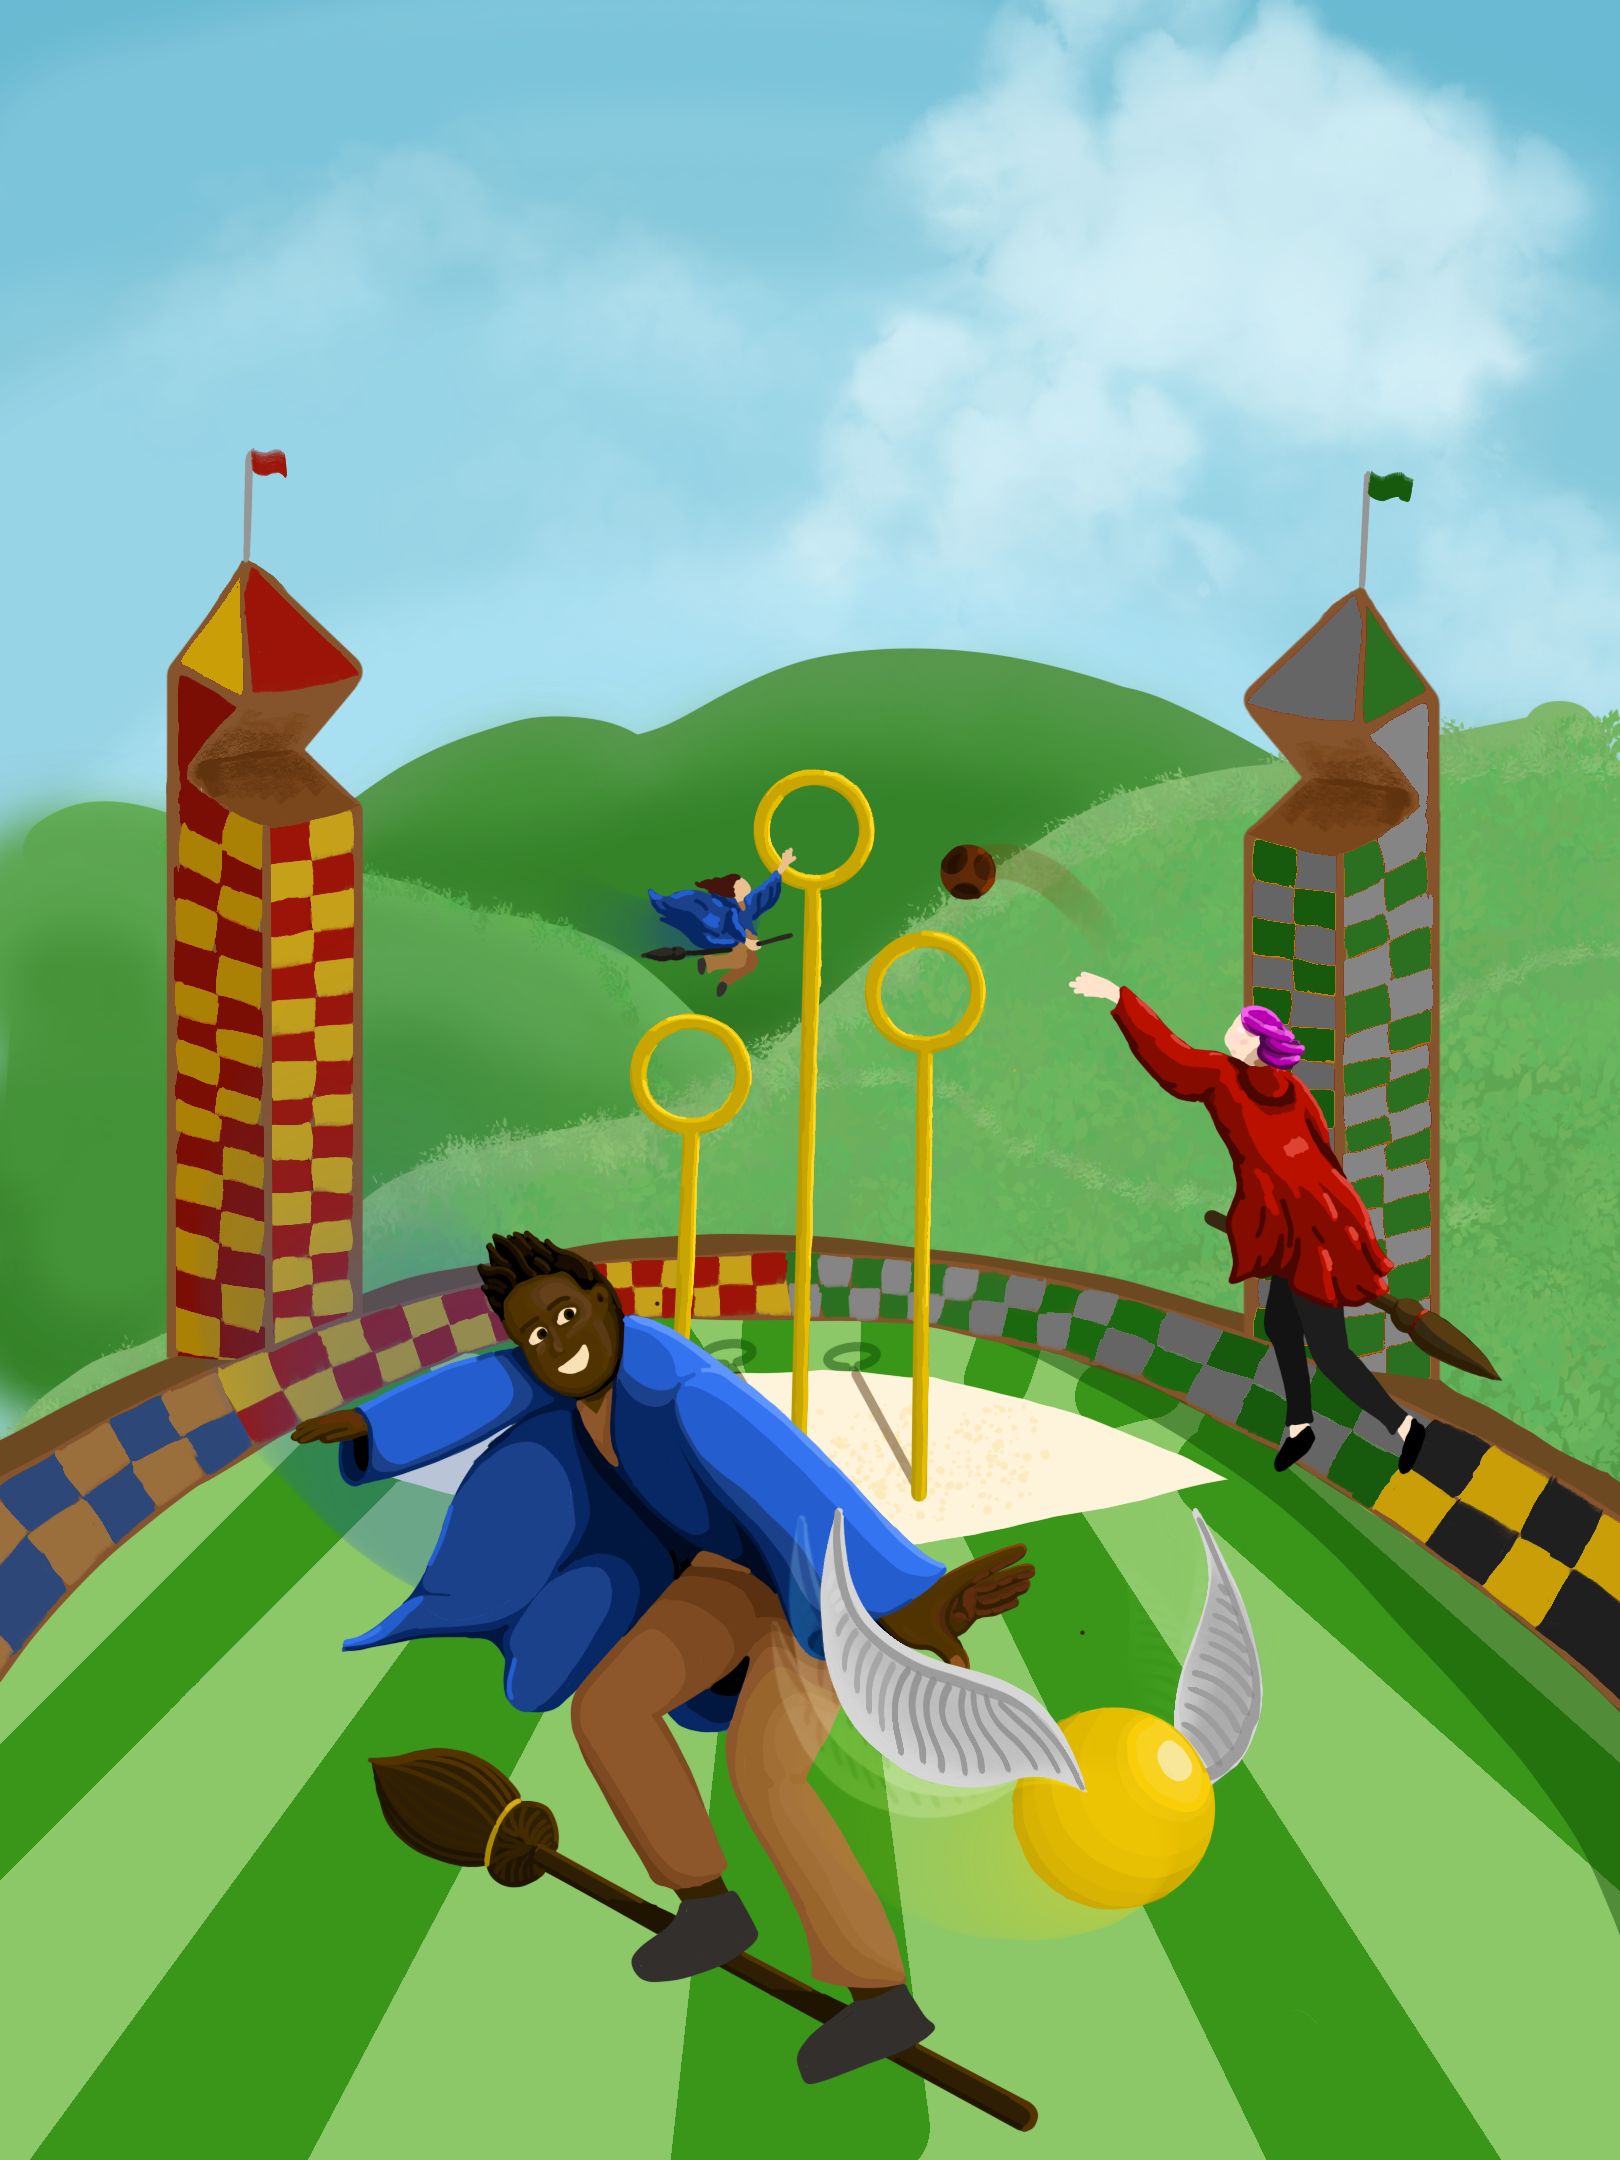 Illustration of a quidditch game with two players in the background and one in the forefront standing on top of his broom to chase the golden snitch.